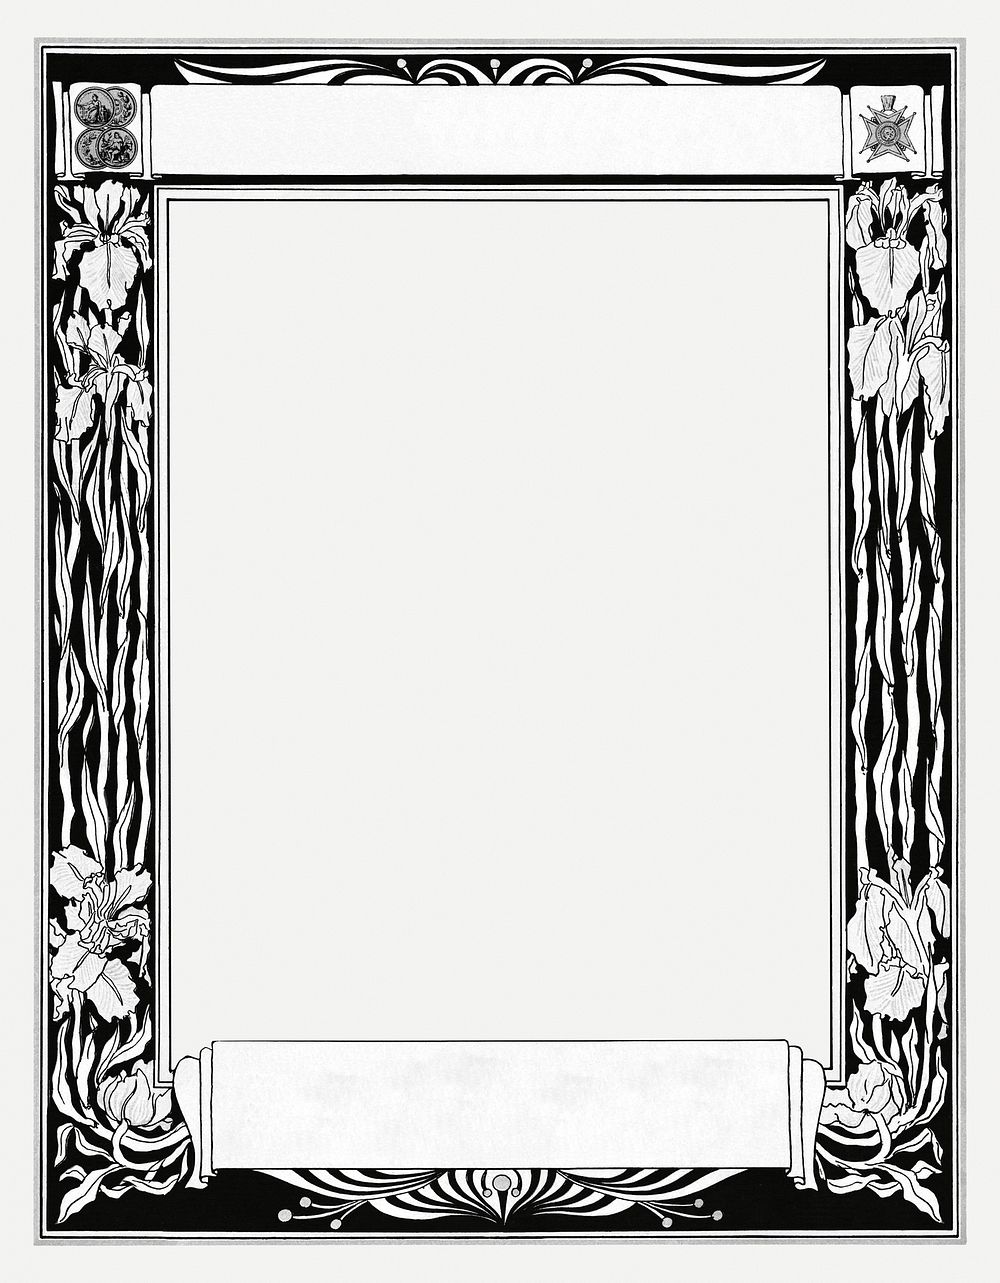 Vintage black floral frame with design space, remixed from the artworks by Johann Georg van Caspel